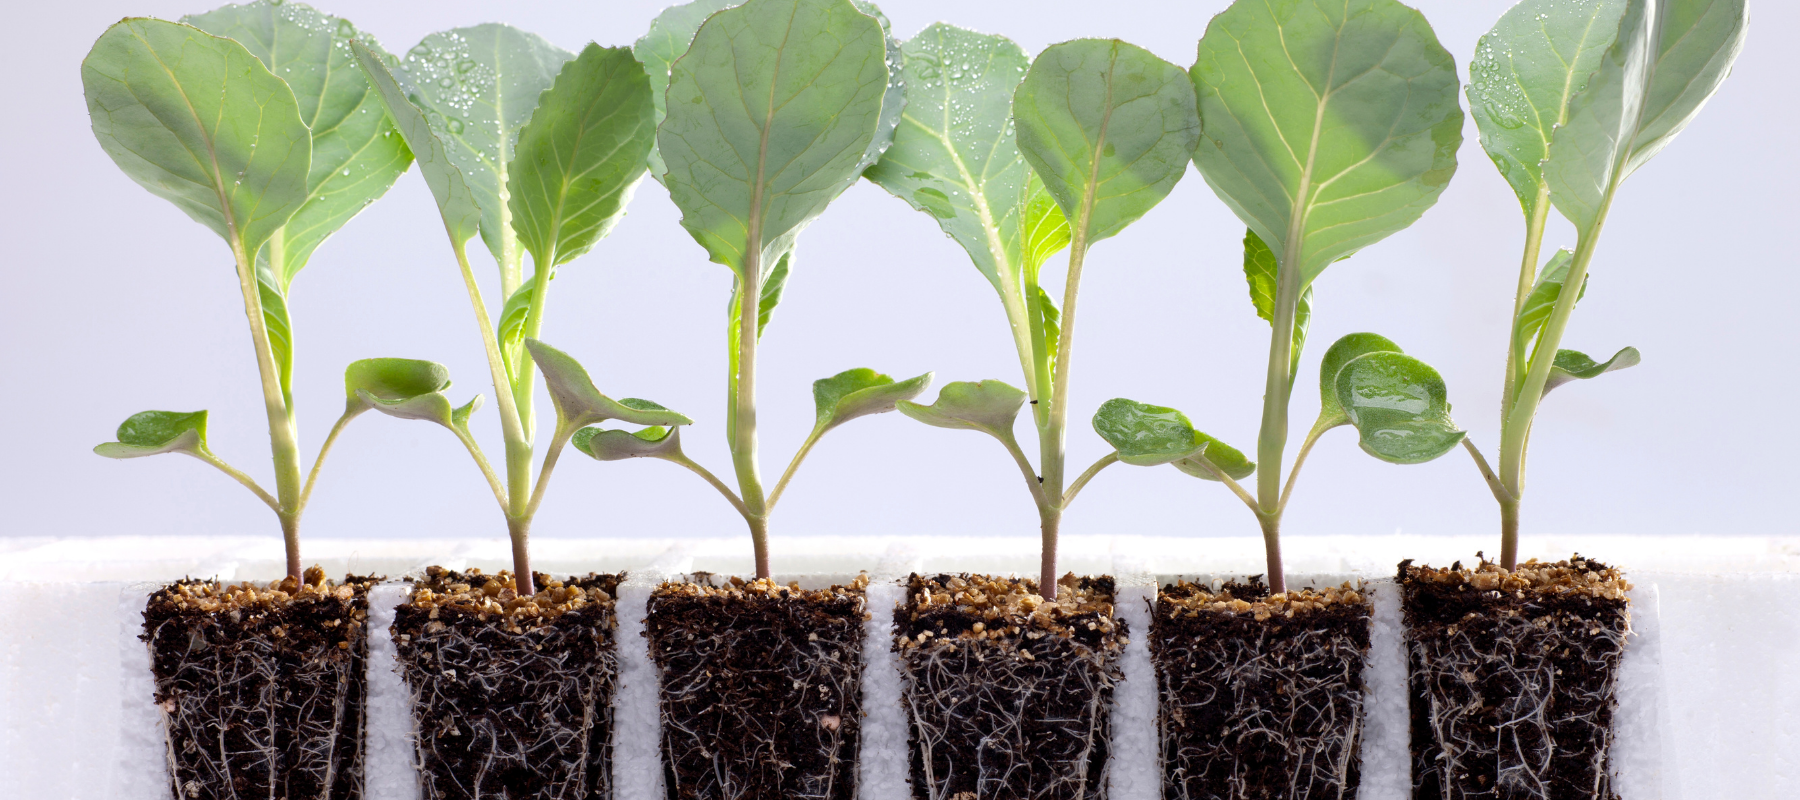 How to take care of seedlings: Our top 5 tips